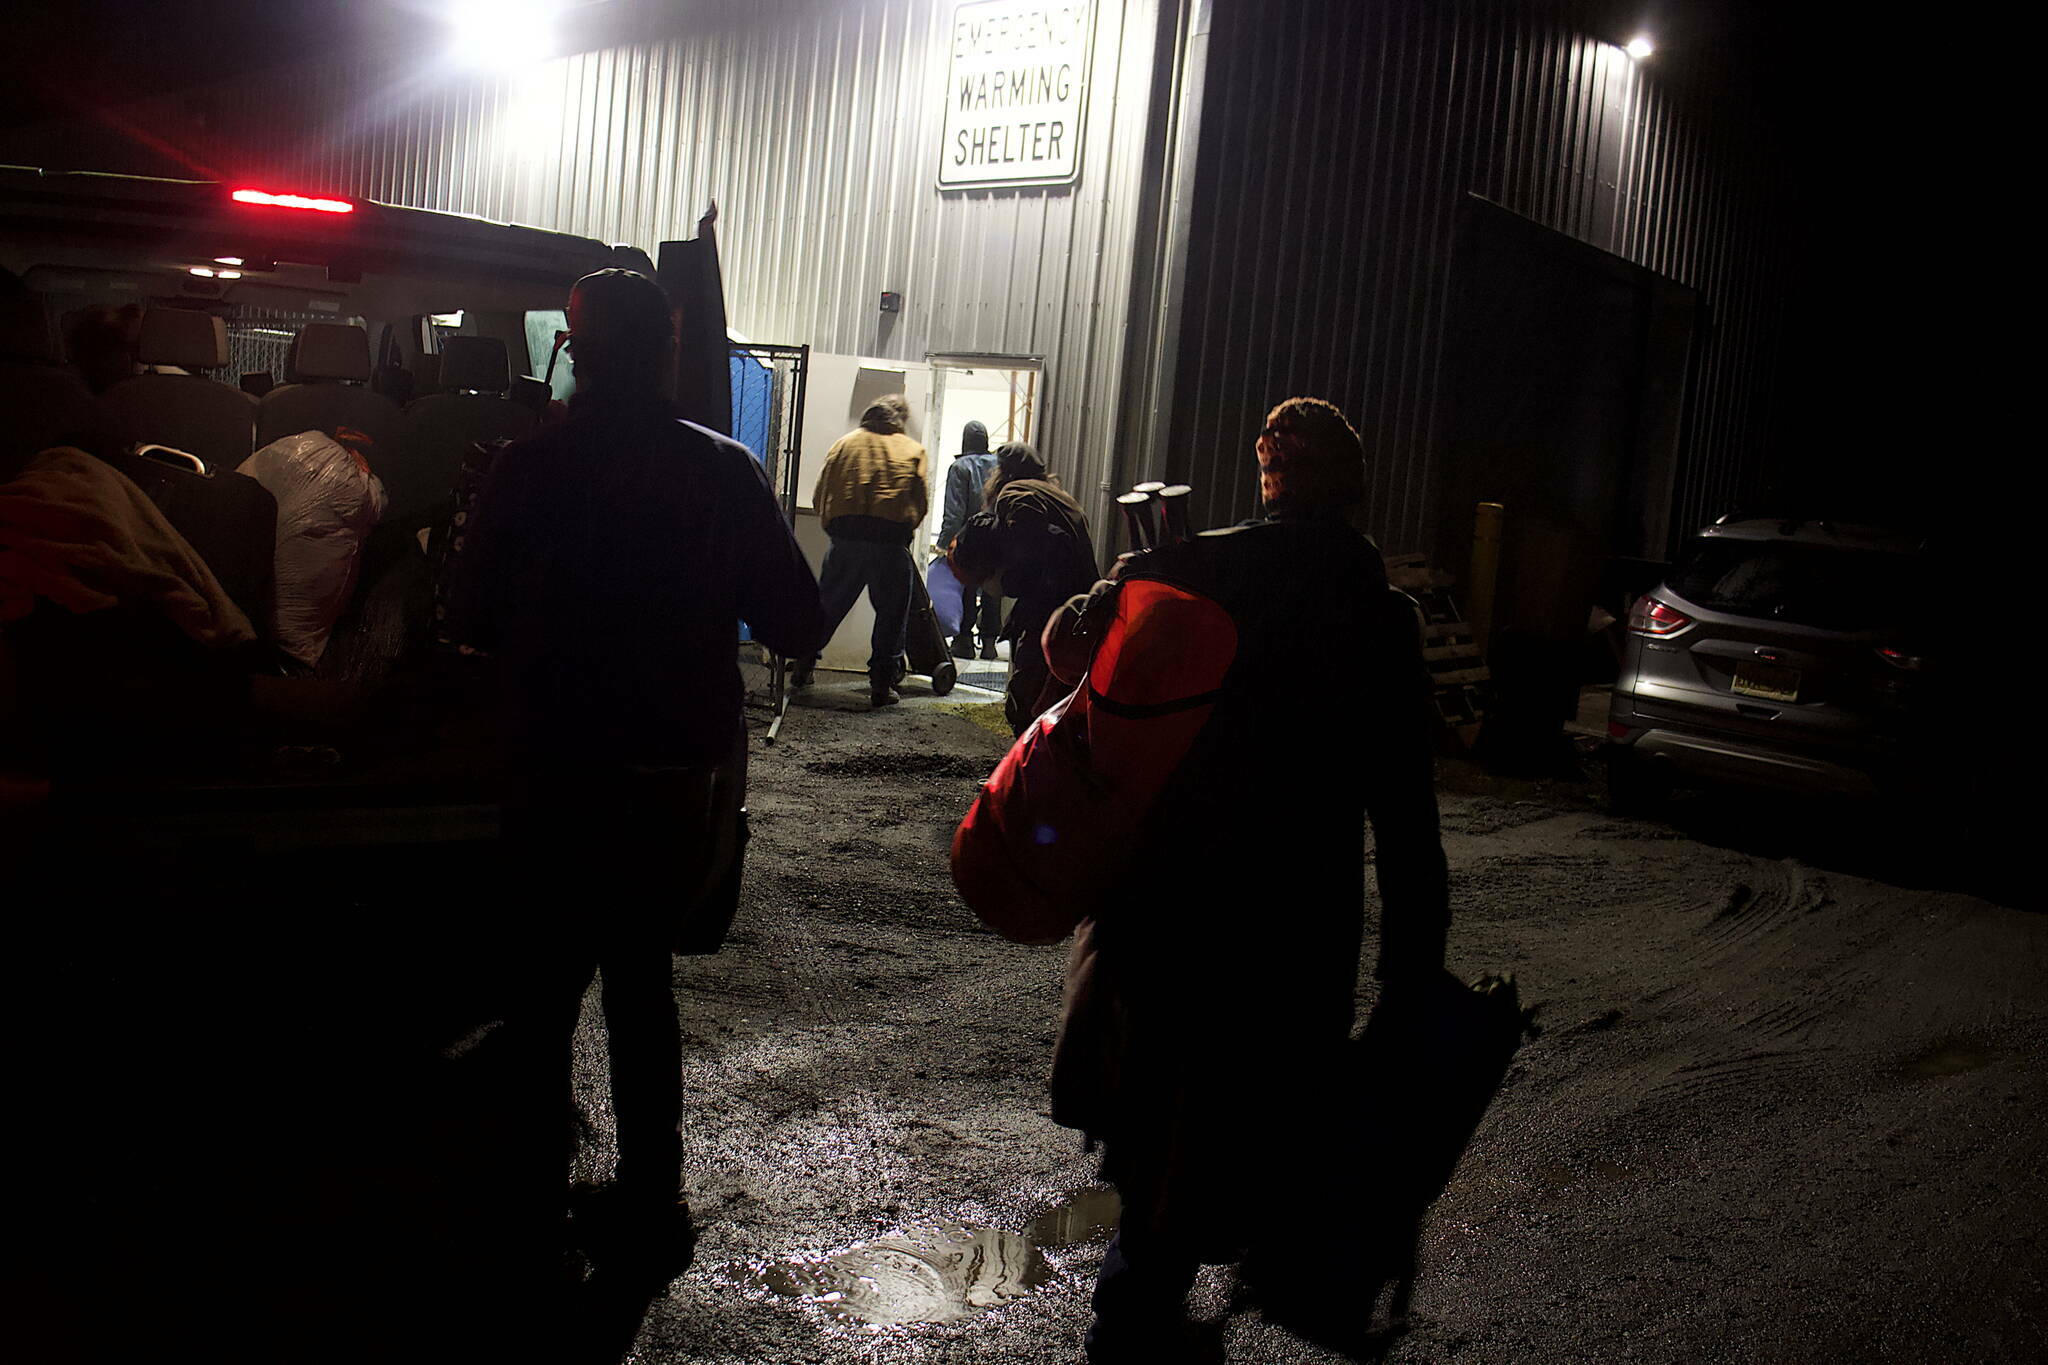 People arriving on a shuttle bus enter the city’s new cold weather emergency shelter on Oct. 20, the first night it was open. (Mark Sabbatini / Juneau Empire File)